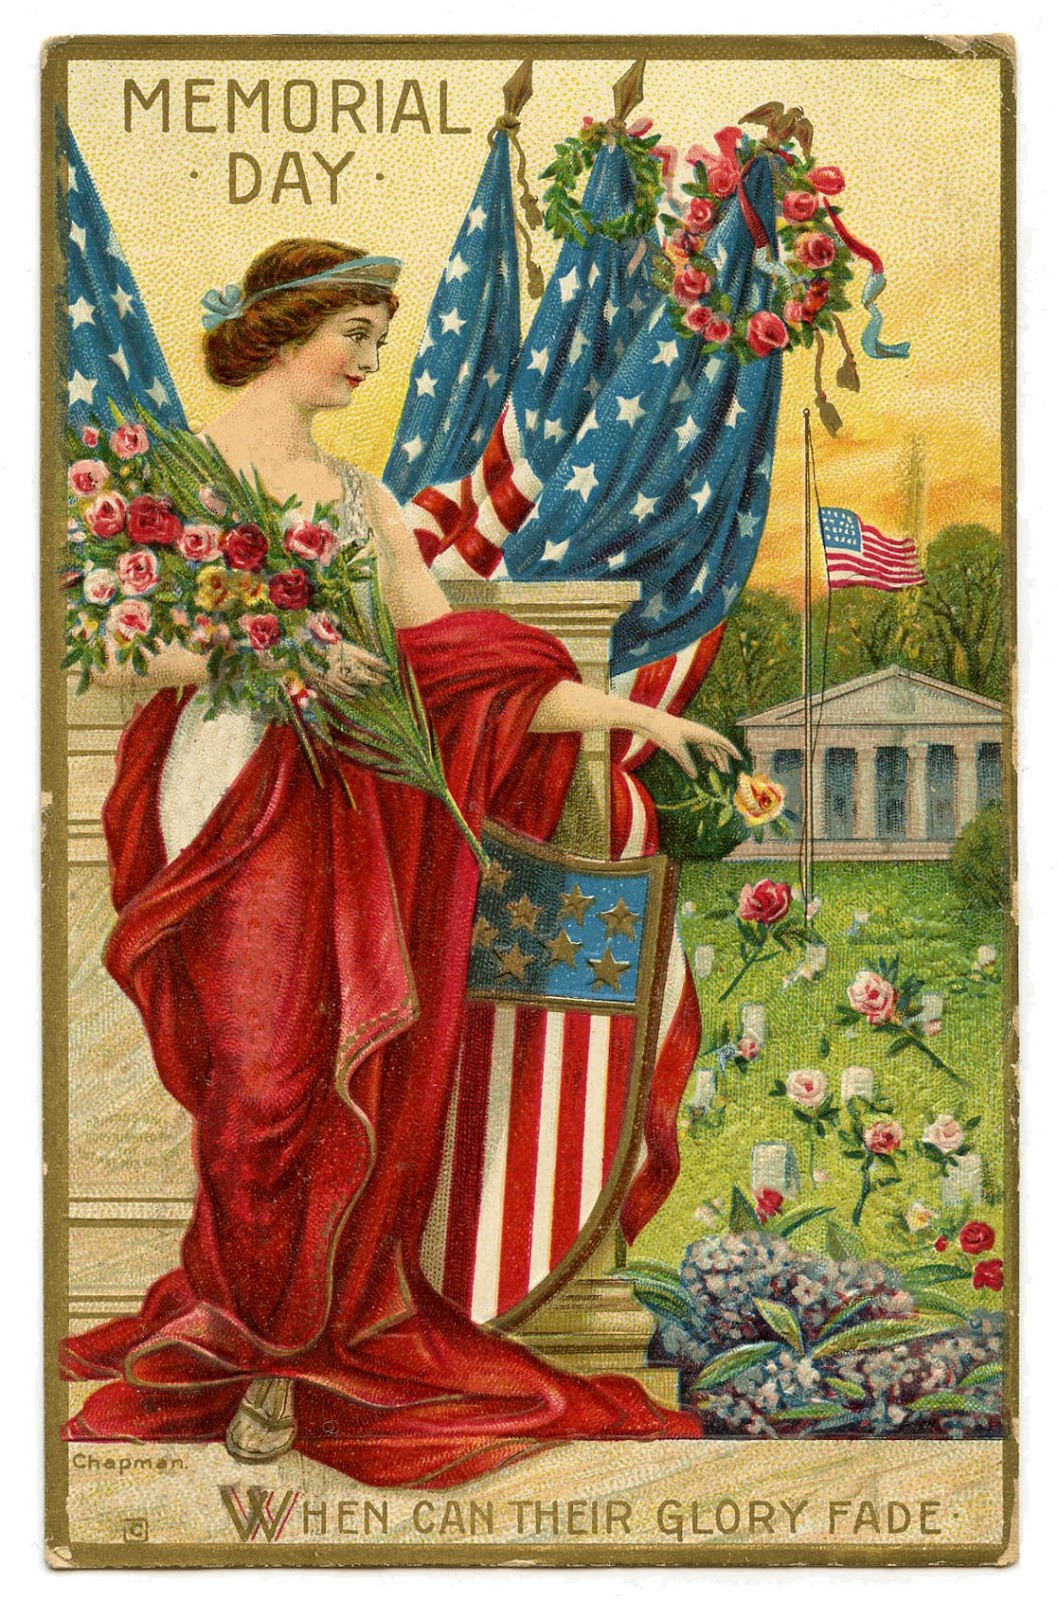 Vintage Memorial Day Image - Lady Liberty Postcard - The Graphics Fairy